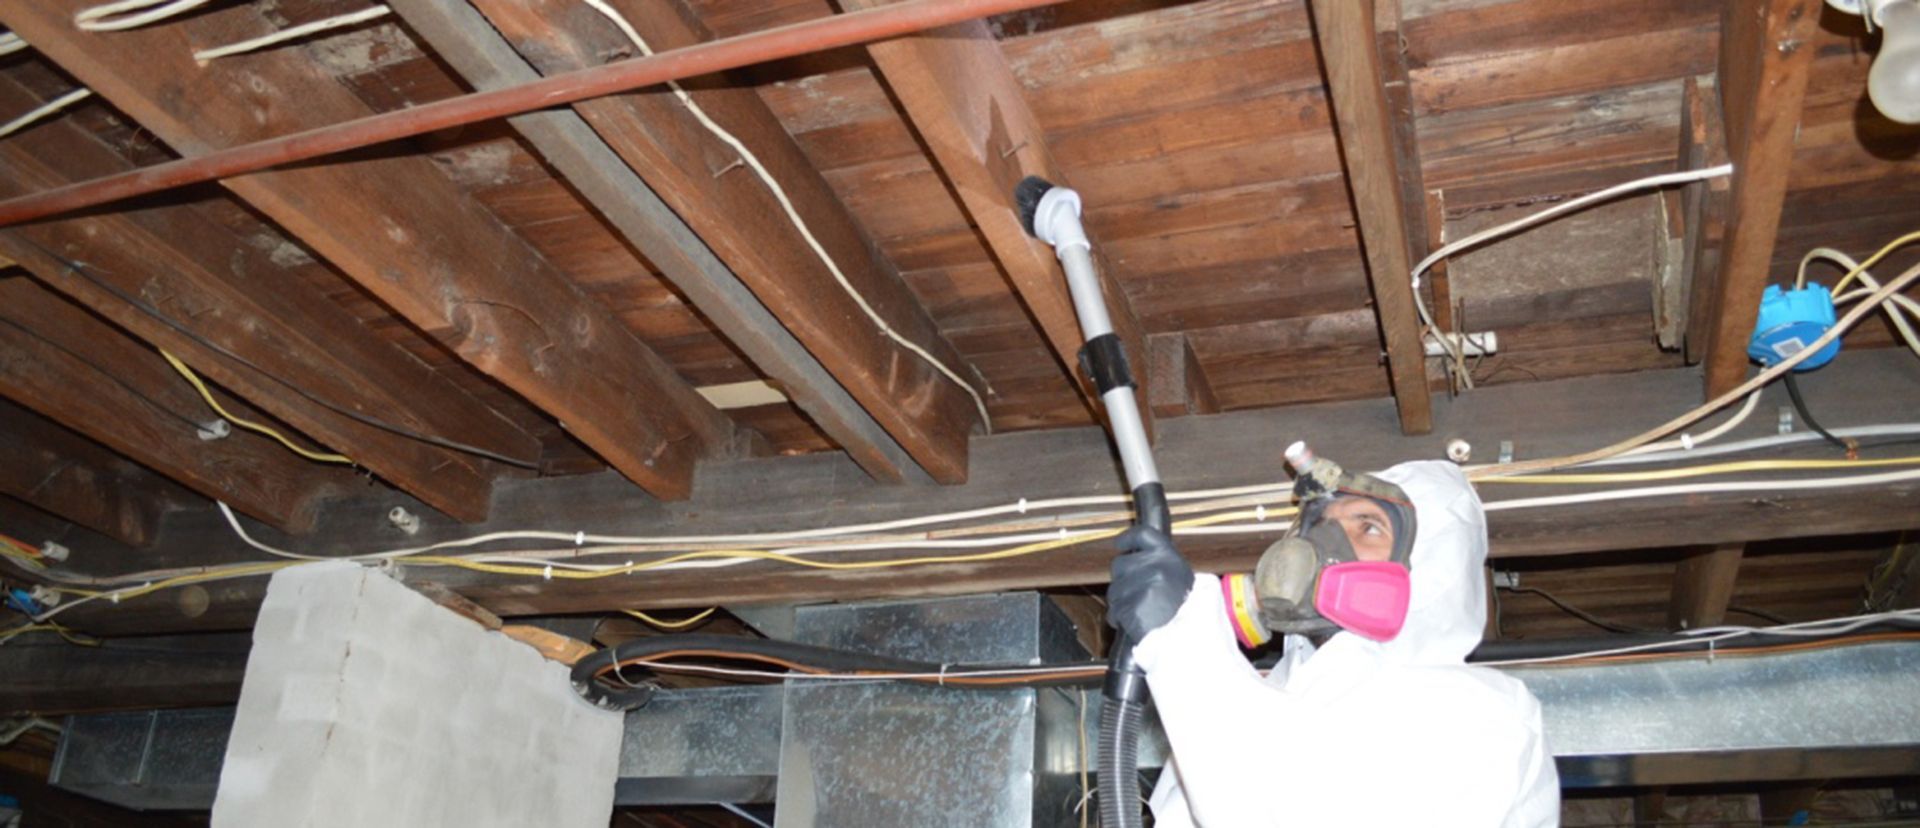 Wondering why there’s mold on your crawl space floor joists?